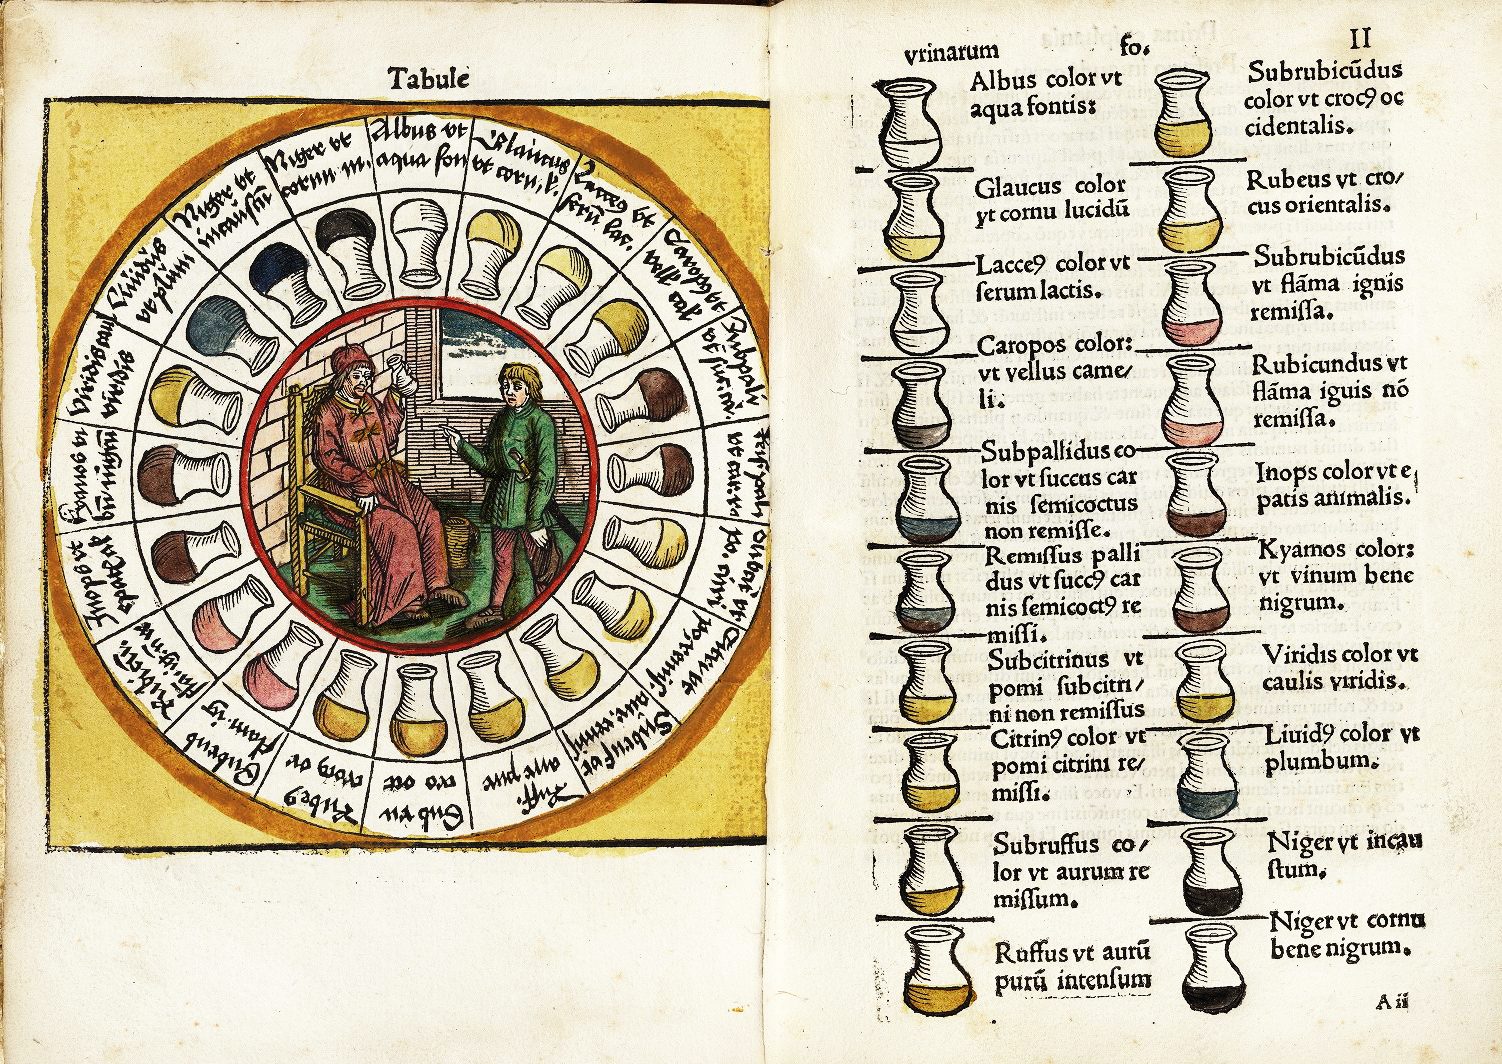 Full-page woodcut of a physician demonstrating uroscopic analysis surrounded by a border of urine flasks with captioned color descriptions. A table on the facing page lists the colors in full.